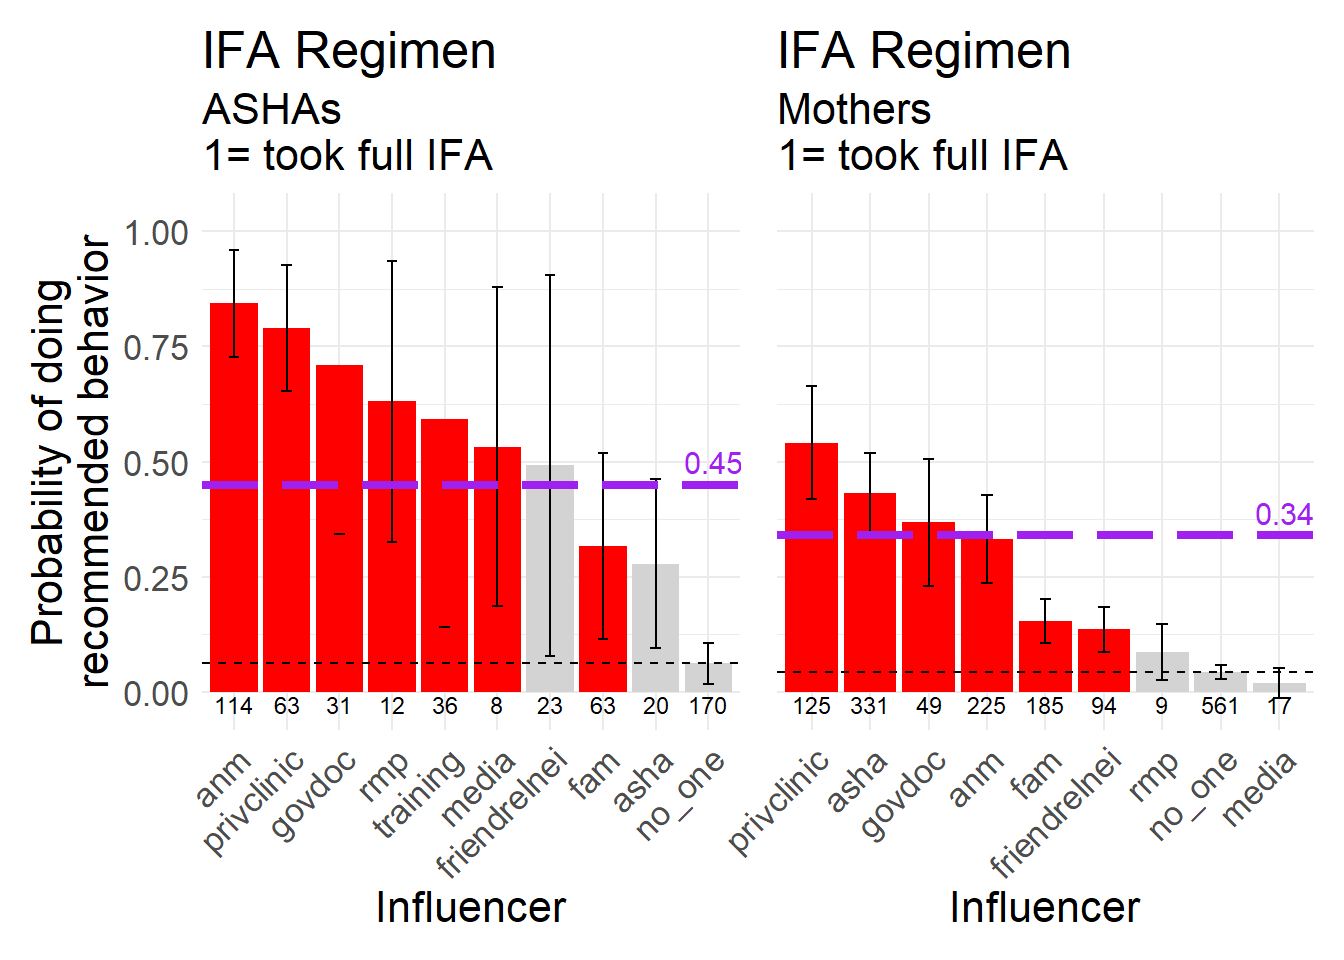 IFA Regimen, a  biomedically recommended behavior, 1 = took the full regimen (as opposed to partial or none).